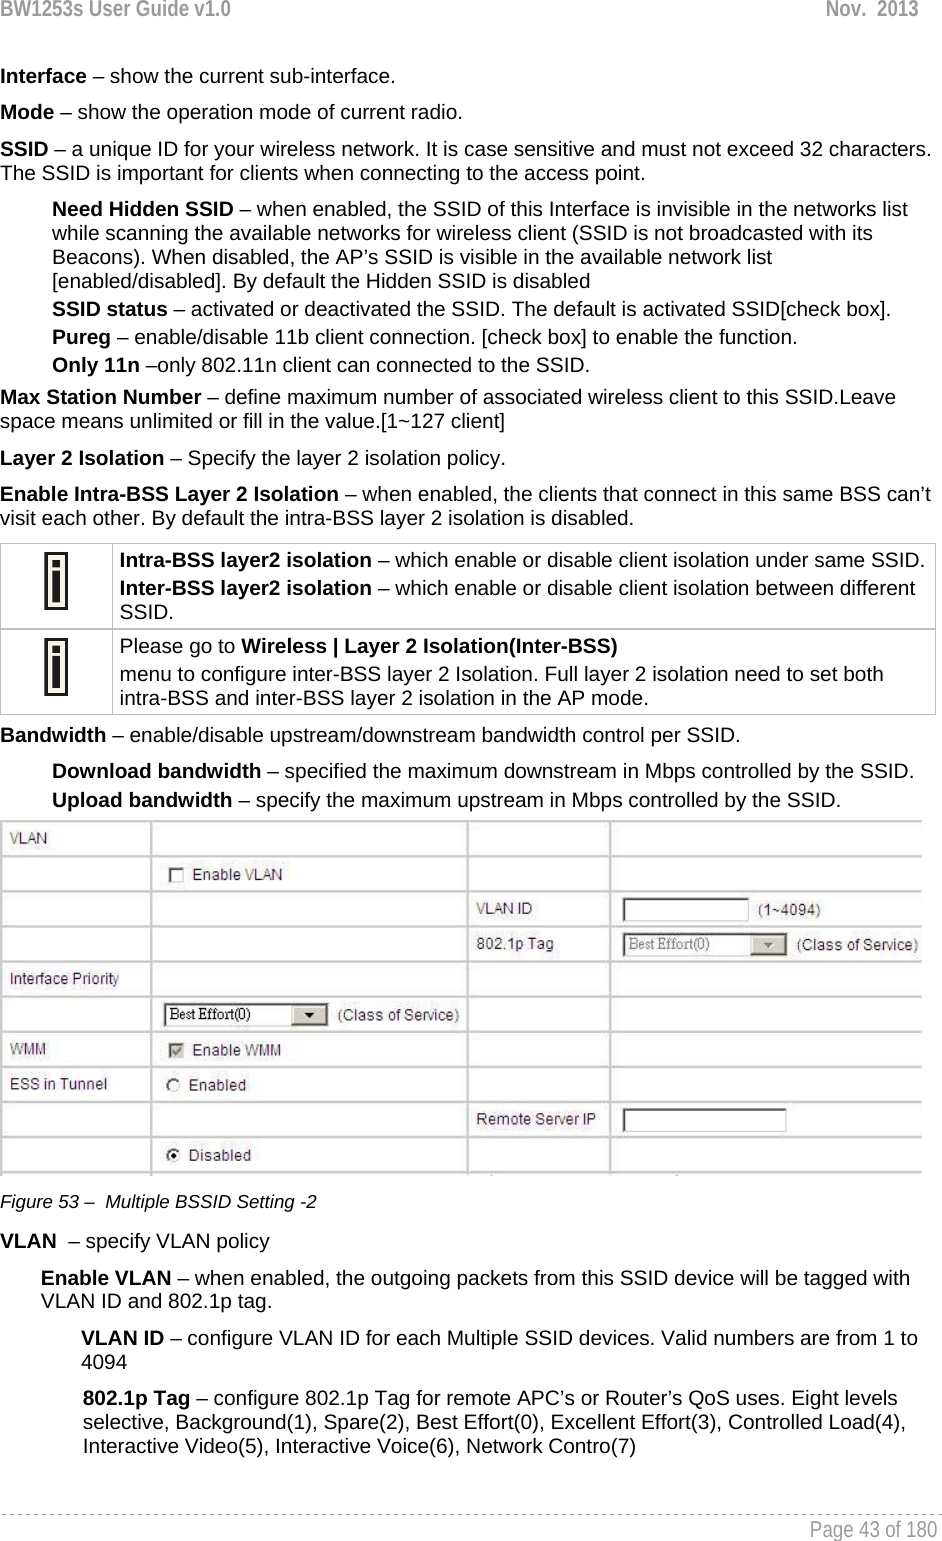 BW1253s User Guide v1.0  Nov.  2013     Page 43 of 180   Interface – show the current sub-interface. Mode – show the operation mode of current radio. SSID – a unique ID for your wireless network. It is case sensitive and must not exceed 32 characters. The SSID is important for clients when connecting to the access point.  Need Hidden SSID – when enabled, the SSID of this Interface is invisible in the networks list while scanning the available networks for wireless client (SSID is not broadcasted with its Beacons). When disabled, the AP’s SSID is visible in the available network list [enabled/disabled]. By default the Hidden SSID is disabled SSID status – activated or deactivated the SSID. The default is activated SSID[check box]. Pureg – enable/disable 11b client connection. [check box] to enable the function. Only 11n –only 802.11n client can connected to the SSID. Max Station Number – define maximum number of associated wireless client to this SSID.Leave space means unlimited or fill in the value.[1~127 client] Layer 2 Isolation – Specify the layer 2 isolation policy. Enable Intra-BSS Layer 2 Isolation – when enabled, the clients that connect in this same BSS can’t visit each other. By default the intra-BSS layer 2 isolation is disabled.  Intra-BSS layer2 isolation – which enable or disable client isolation under same SSID.Inter-BSS layer2 isolation – which enable or disable client isolation between different SSID.  Please go to Wireless | Layer 2 Isolation(Inter-BSS) menu to configure inter-BSS layer 2 Isolation. Full layer 2 isolation need to set both intra-BSS and inter-BSS layer 2 isolation in the AP mode. Bandwidth – enable/disable upstream/downstream bandwidth control per SSID. Download bandwidth – specified the maximum downstream in Mbps controlled by the SSID. Upload bandwidth – specify the maximum upstream in Mbps controlled by the SSID.  Figure 53 –  Multiple BSSID Setting -2 VLAN  – specify VLAN policy  Enable VLAN – when enabled, the outgoing packets from this SSID device will be tagged with VLAN ID and 802.1p tag.  VLAN ID – configure VLAN ID for each Multiple SSID devices. Valid numbers are from 1 to 4094 802.1p Tag – configure 802.1p Tag for remote APC’s or Router’s QoS uses. Eight levels selective, Background(1), Spare(2), Best Effort(0), Excellent Effort(3), Controlled Load(4), Interactive Video(5), Interactive Voice(6), Network Contro(7) 